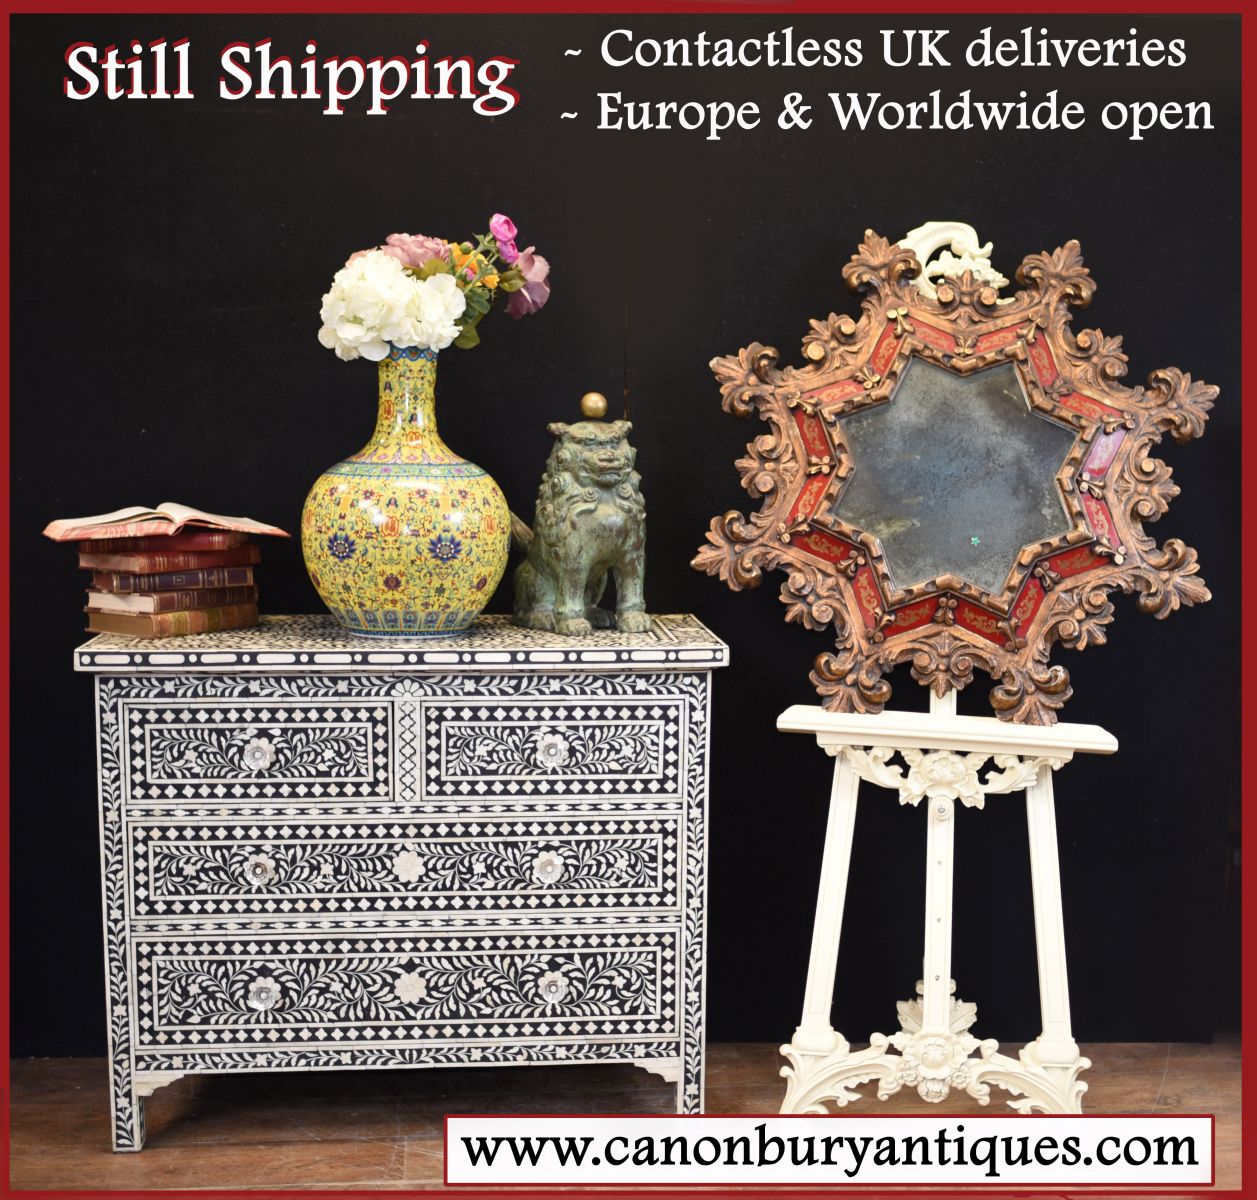 Canonbury Antiques still fulfilling all orders to UK and rest of world